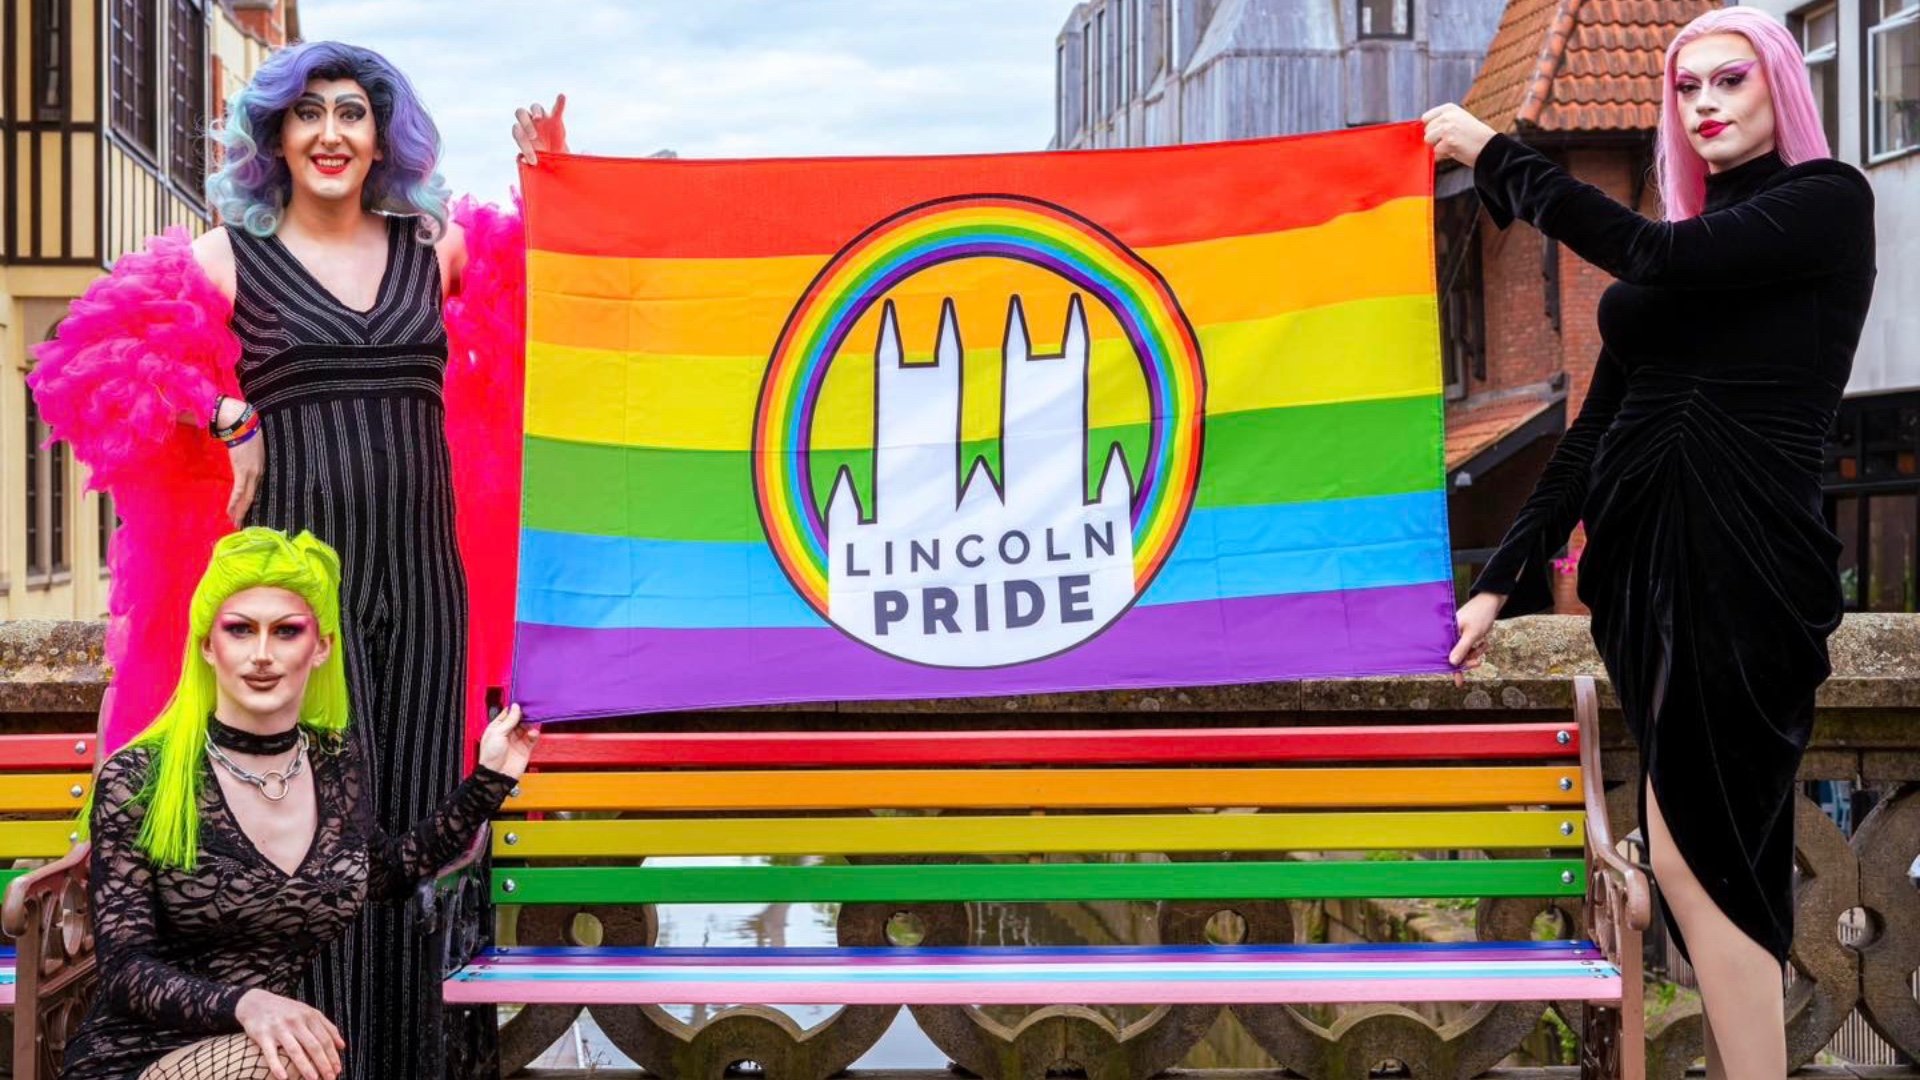 Lincoln Pride Why this event is so important to the LGBTQ+ community